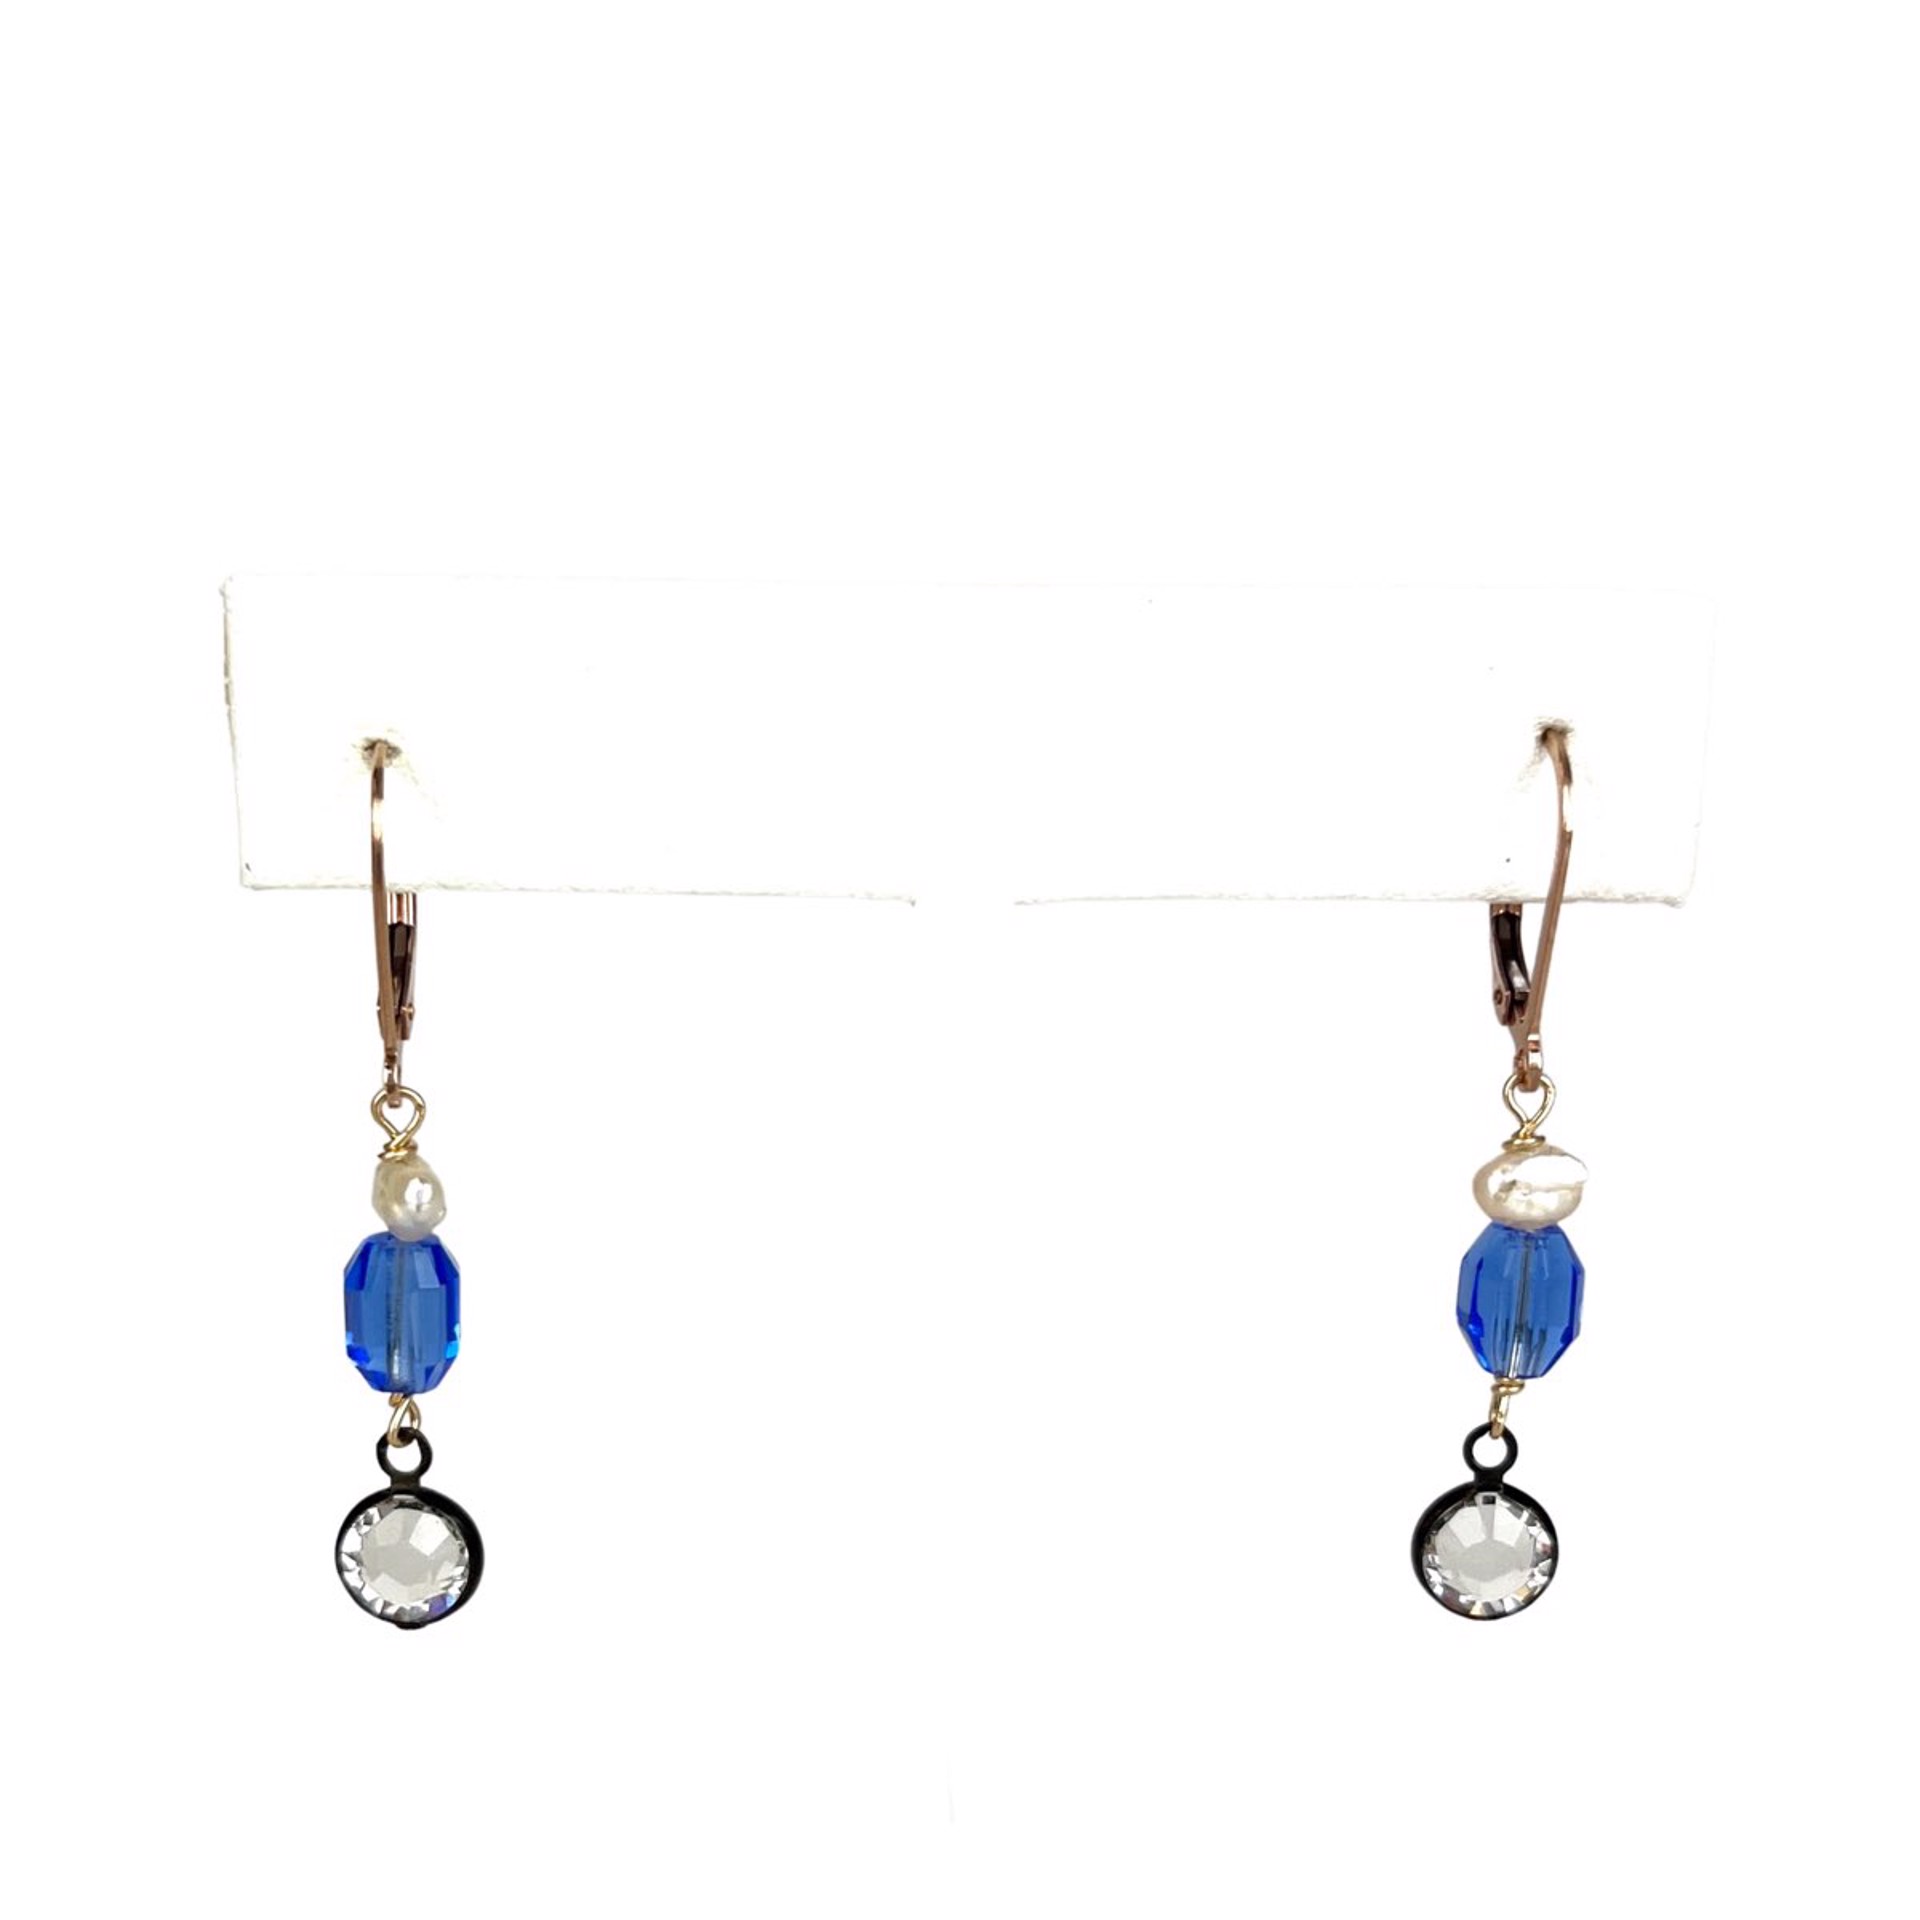 Vintage Blue Swarovski, Crystal, Pearl, and Rose Gold Fill Earrings by Nola Smodic